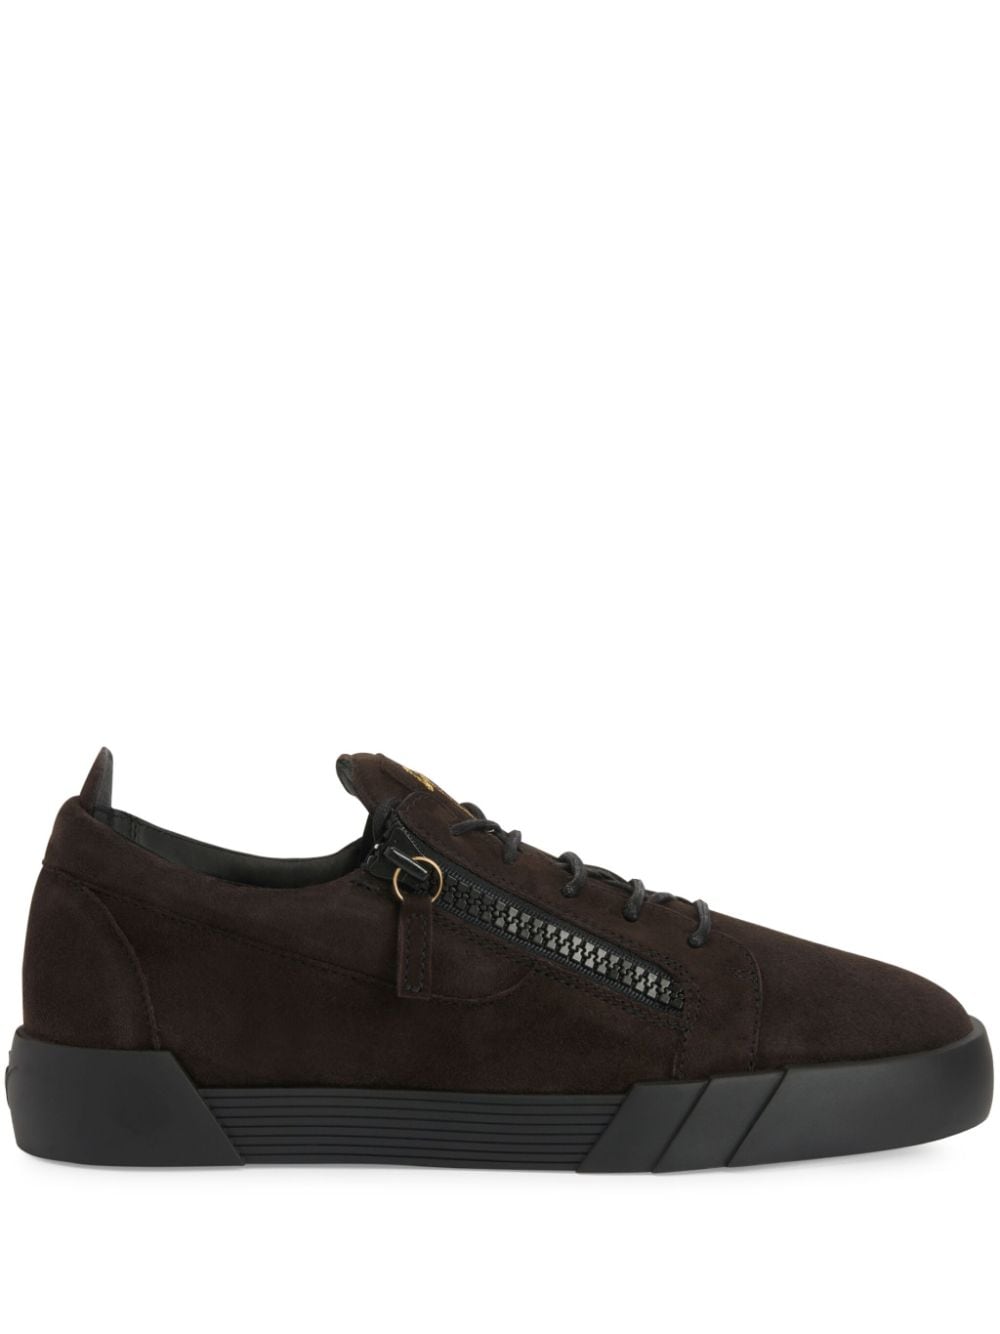 Shop Giuseppe Zanotti The Shark 5.0 Suede Sneakers In Brown